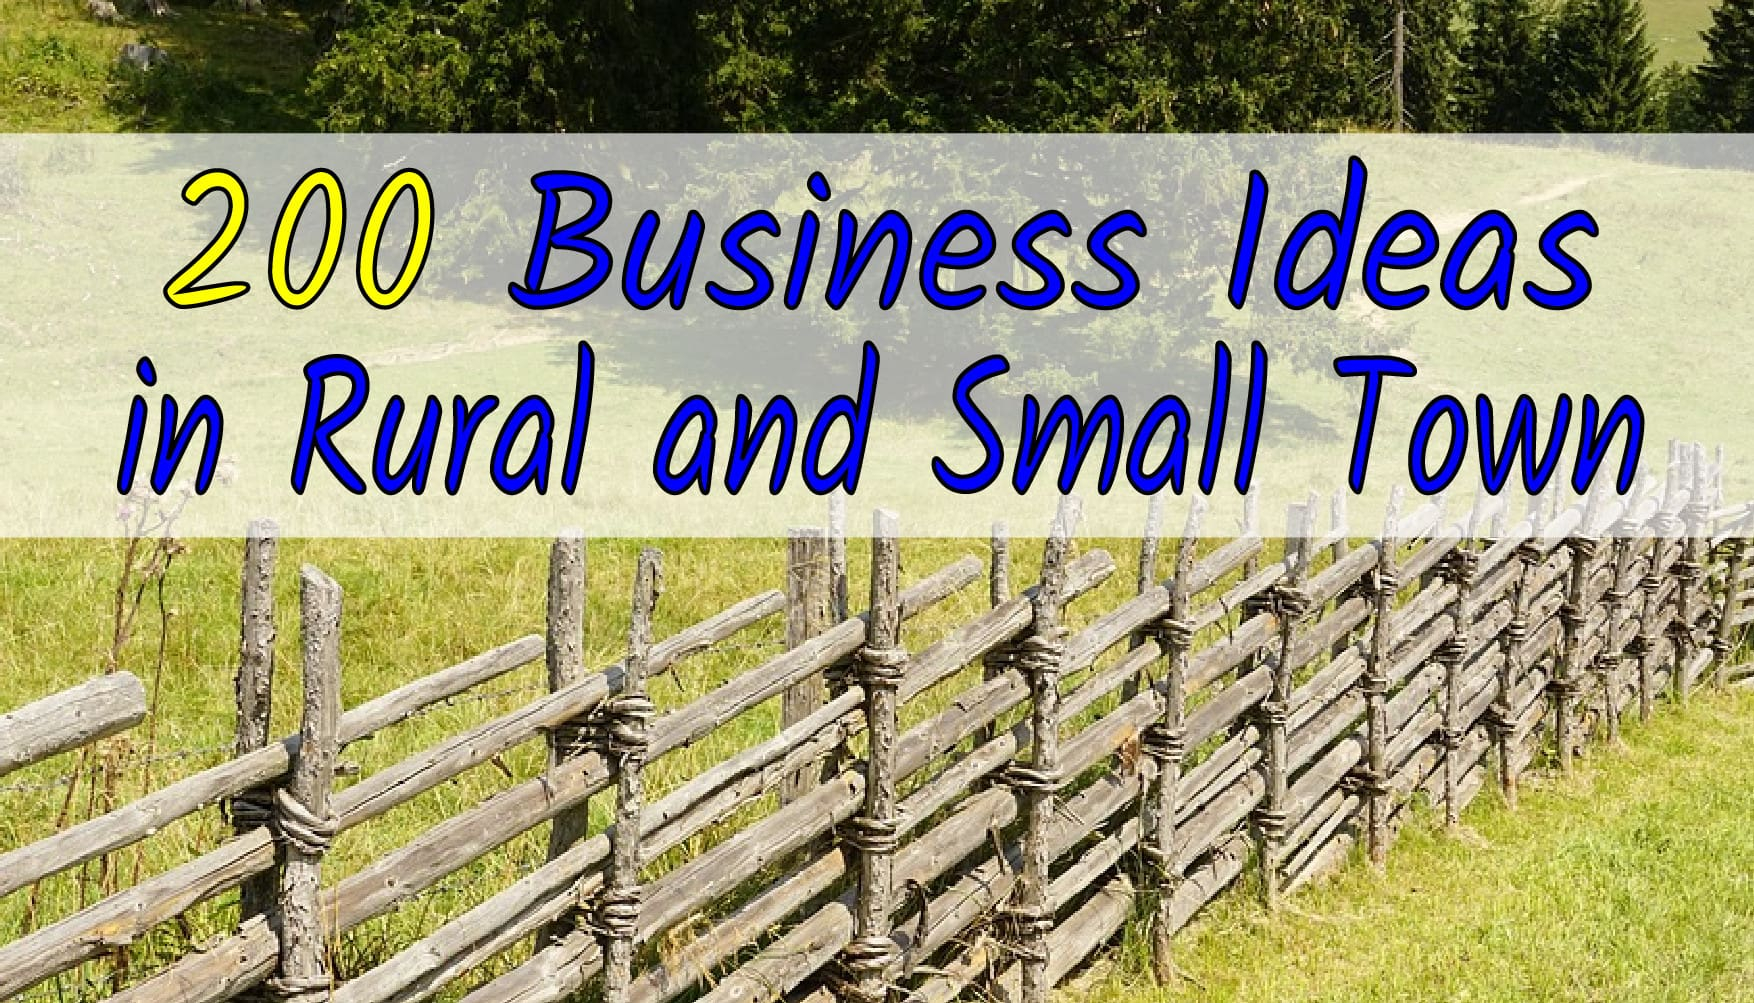 10 Stunning Business Ideas For Rural Areas give 200 business ideas in rural areas and small townchris tong 2022